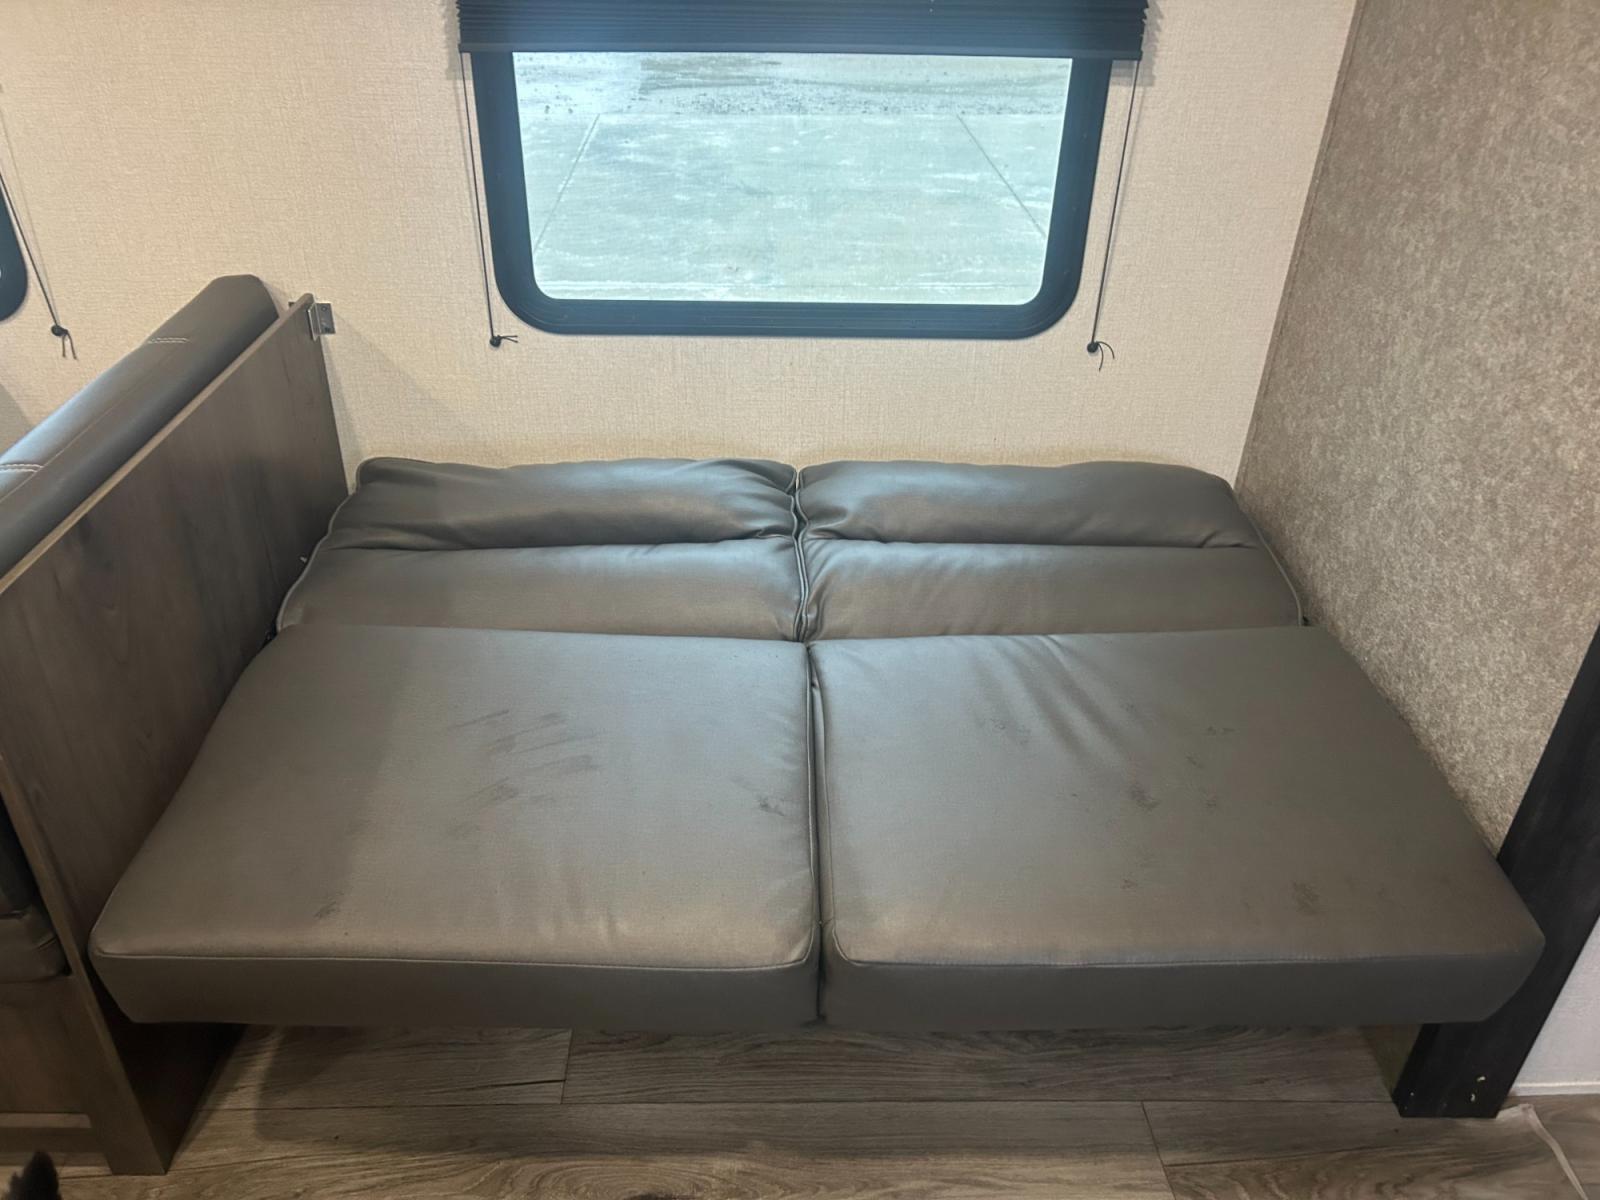 2021 White /TAN Highland Ridge RV, Inc OPEN RANGE 26BHS (58TBH0BP7M1) , located at 17760 Hwy 62, Morris, OK, 74445, 35.609104, -95.877060 - 2021 HIGHLAND RIDGE OPEN RANGE IS PERFECT FOR A SMALL FAMILY OR A LARGE. THIS CAMPER IS 30.5FT LONG AND WILL SLEEP 10 PEOPLE. FEATURES A 16FT POWER AWNING, OUTSIDE STORAGE, DOUBLE AXEL, SINGLE SLIDE OUT, POWER HITCH, AND MANUAL JACKS. IN THE FRONT OF THIS CAMPER IS A QUEEN SIZED BED WITH OVERHEAD ST - Photo #17